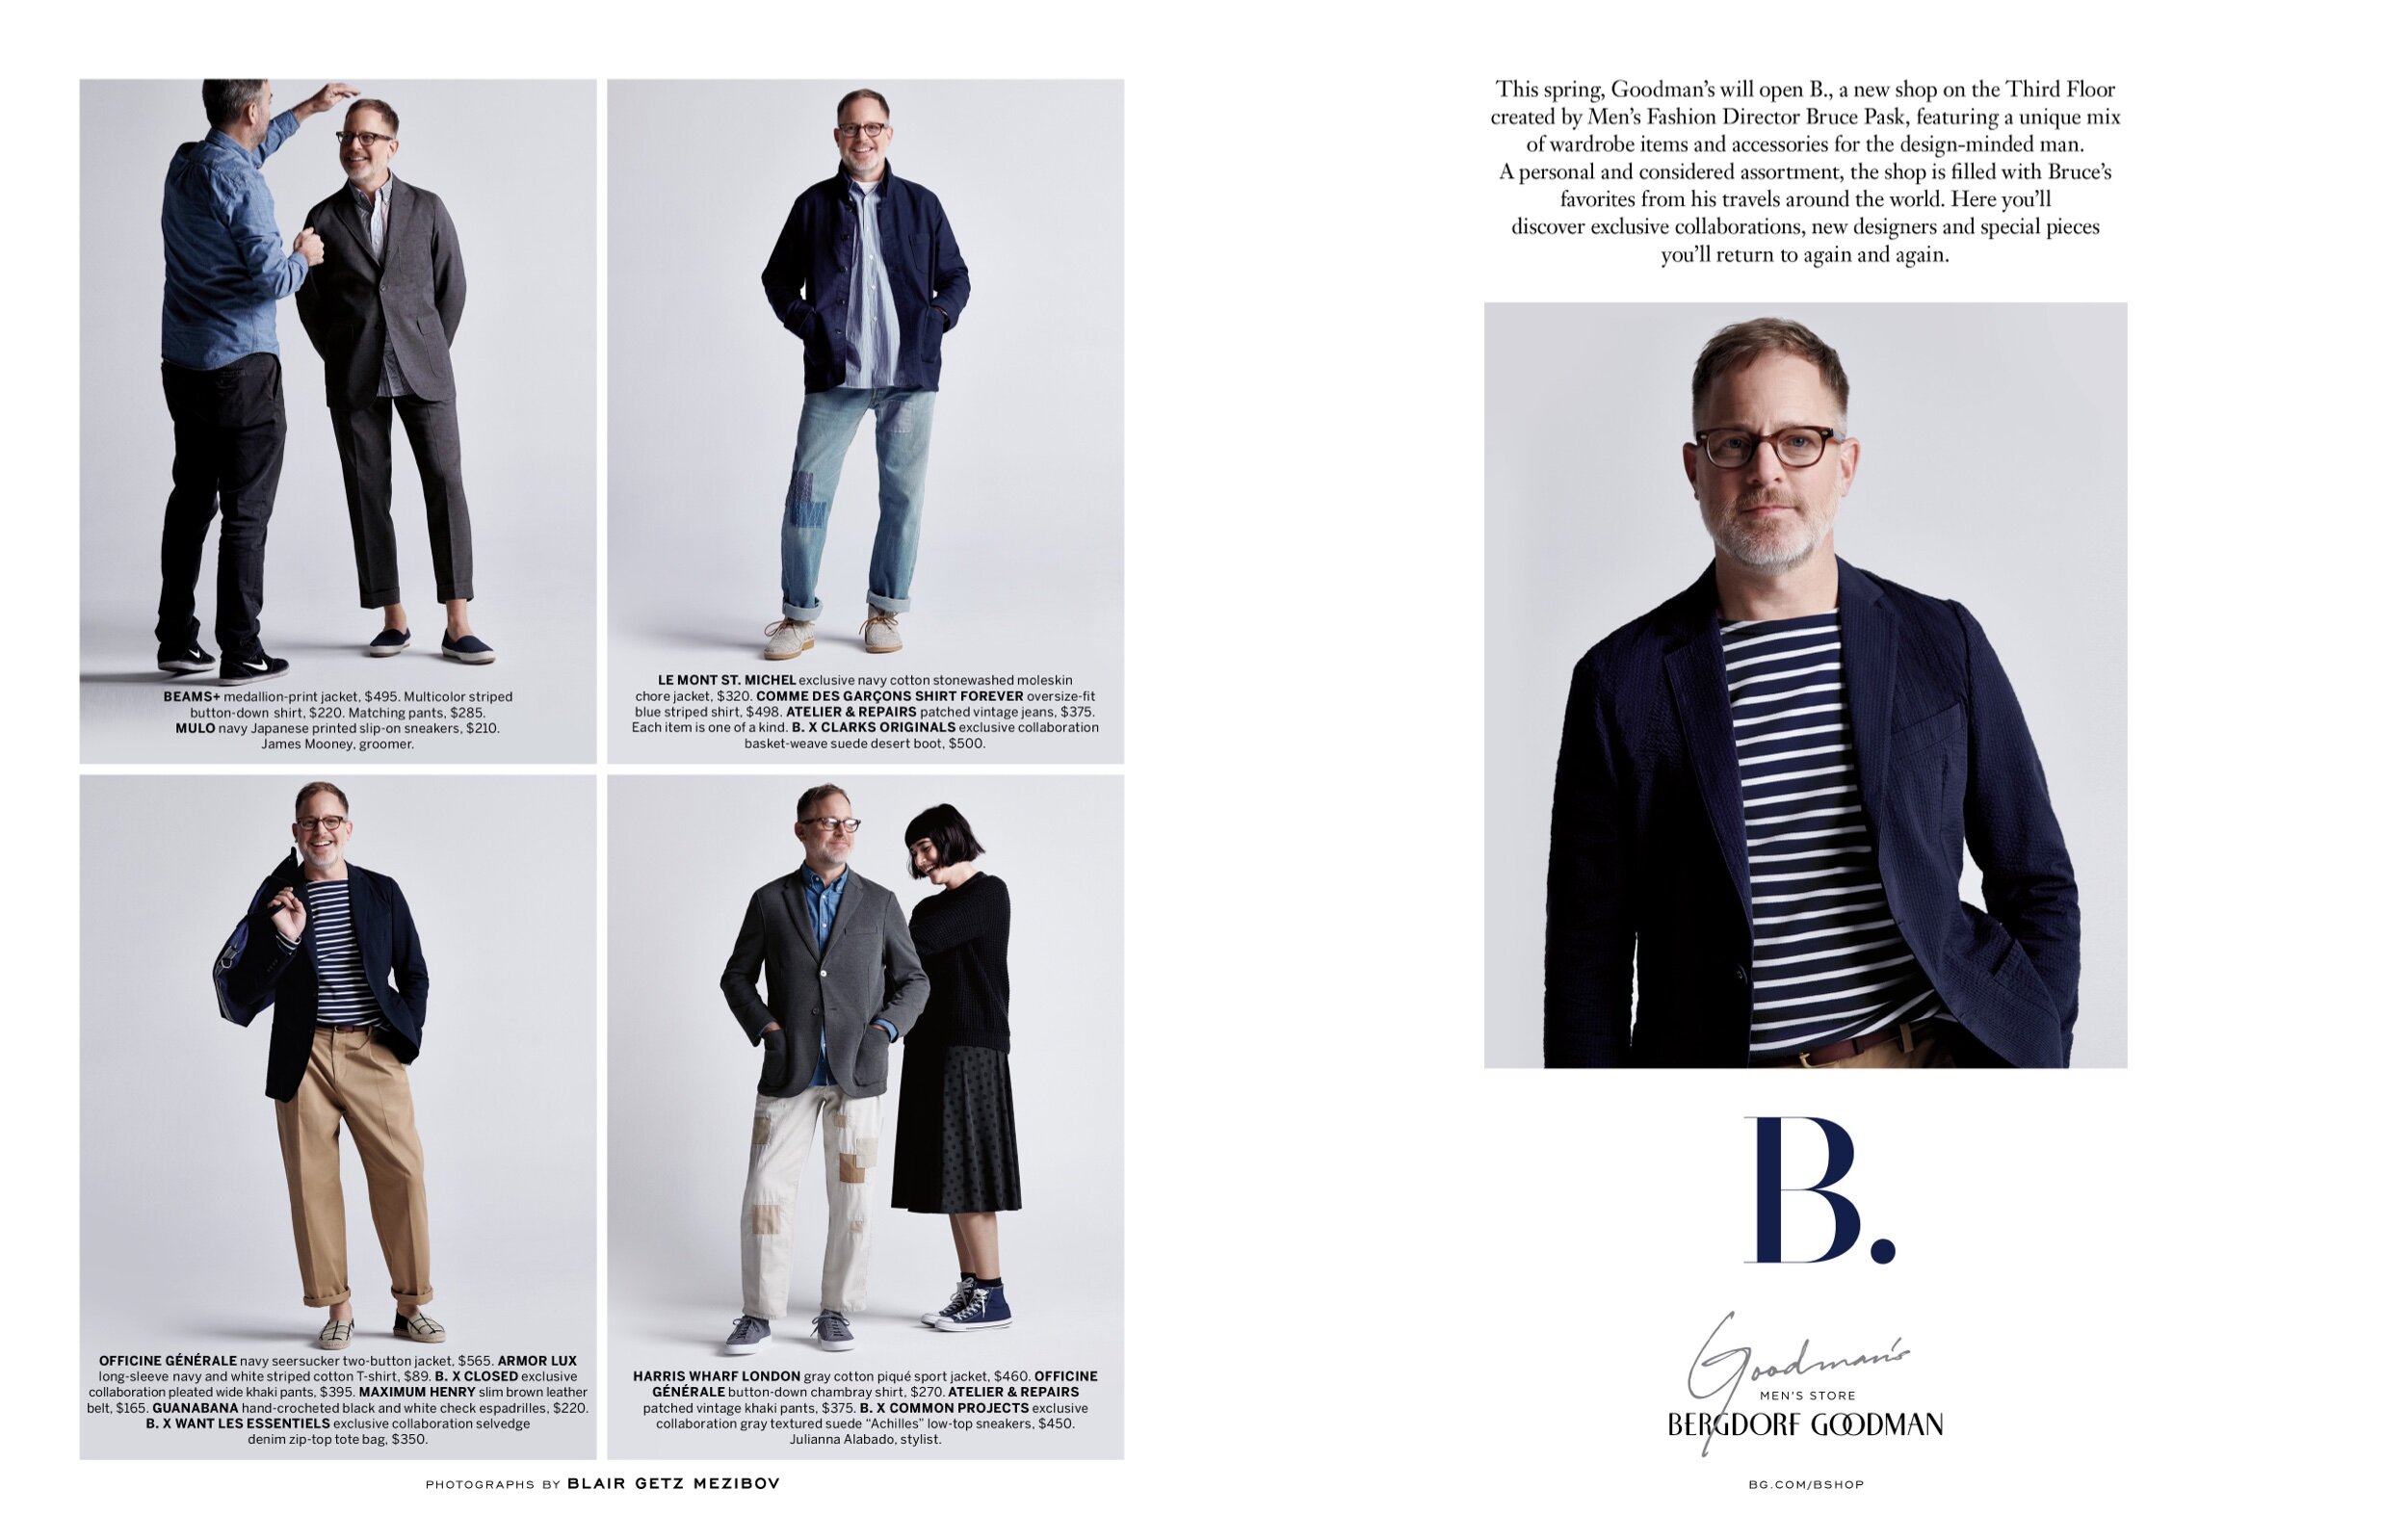  Editorial spread for the launch of Men’s Fashion Director Bruce Pask’s concept shop, B. 